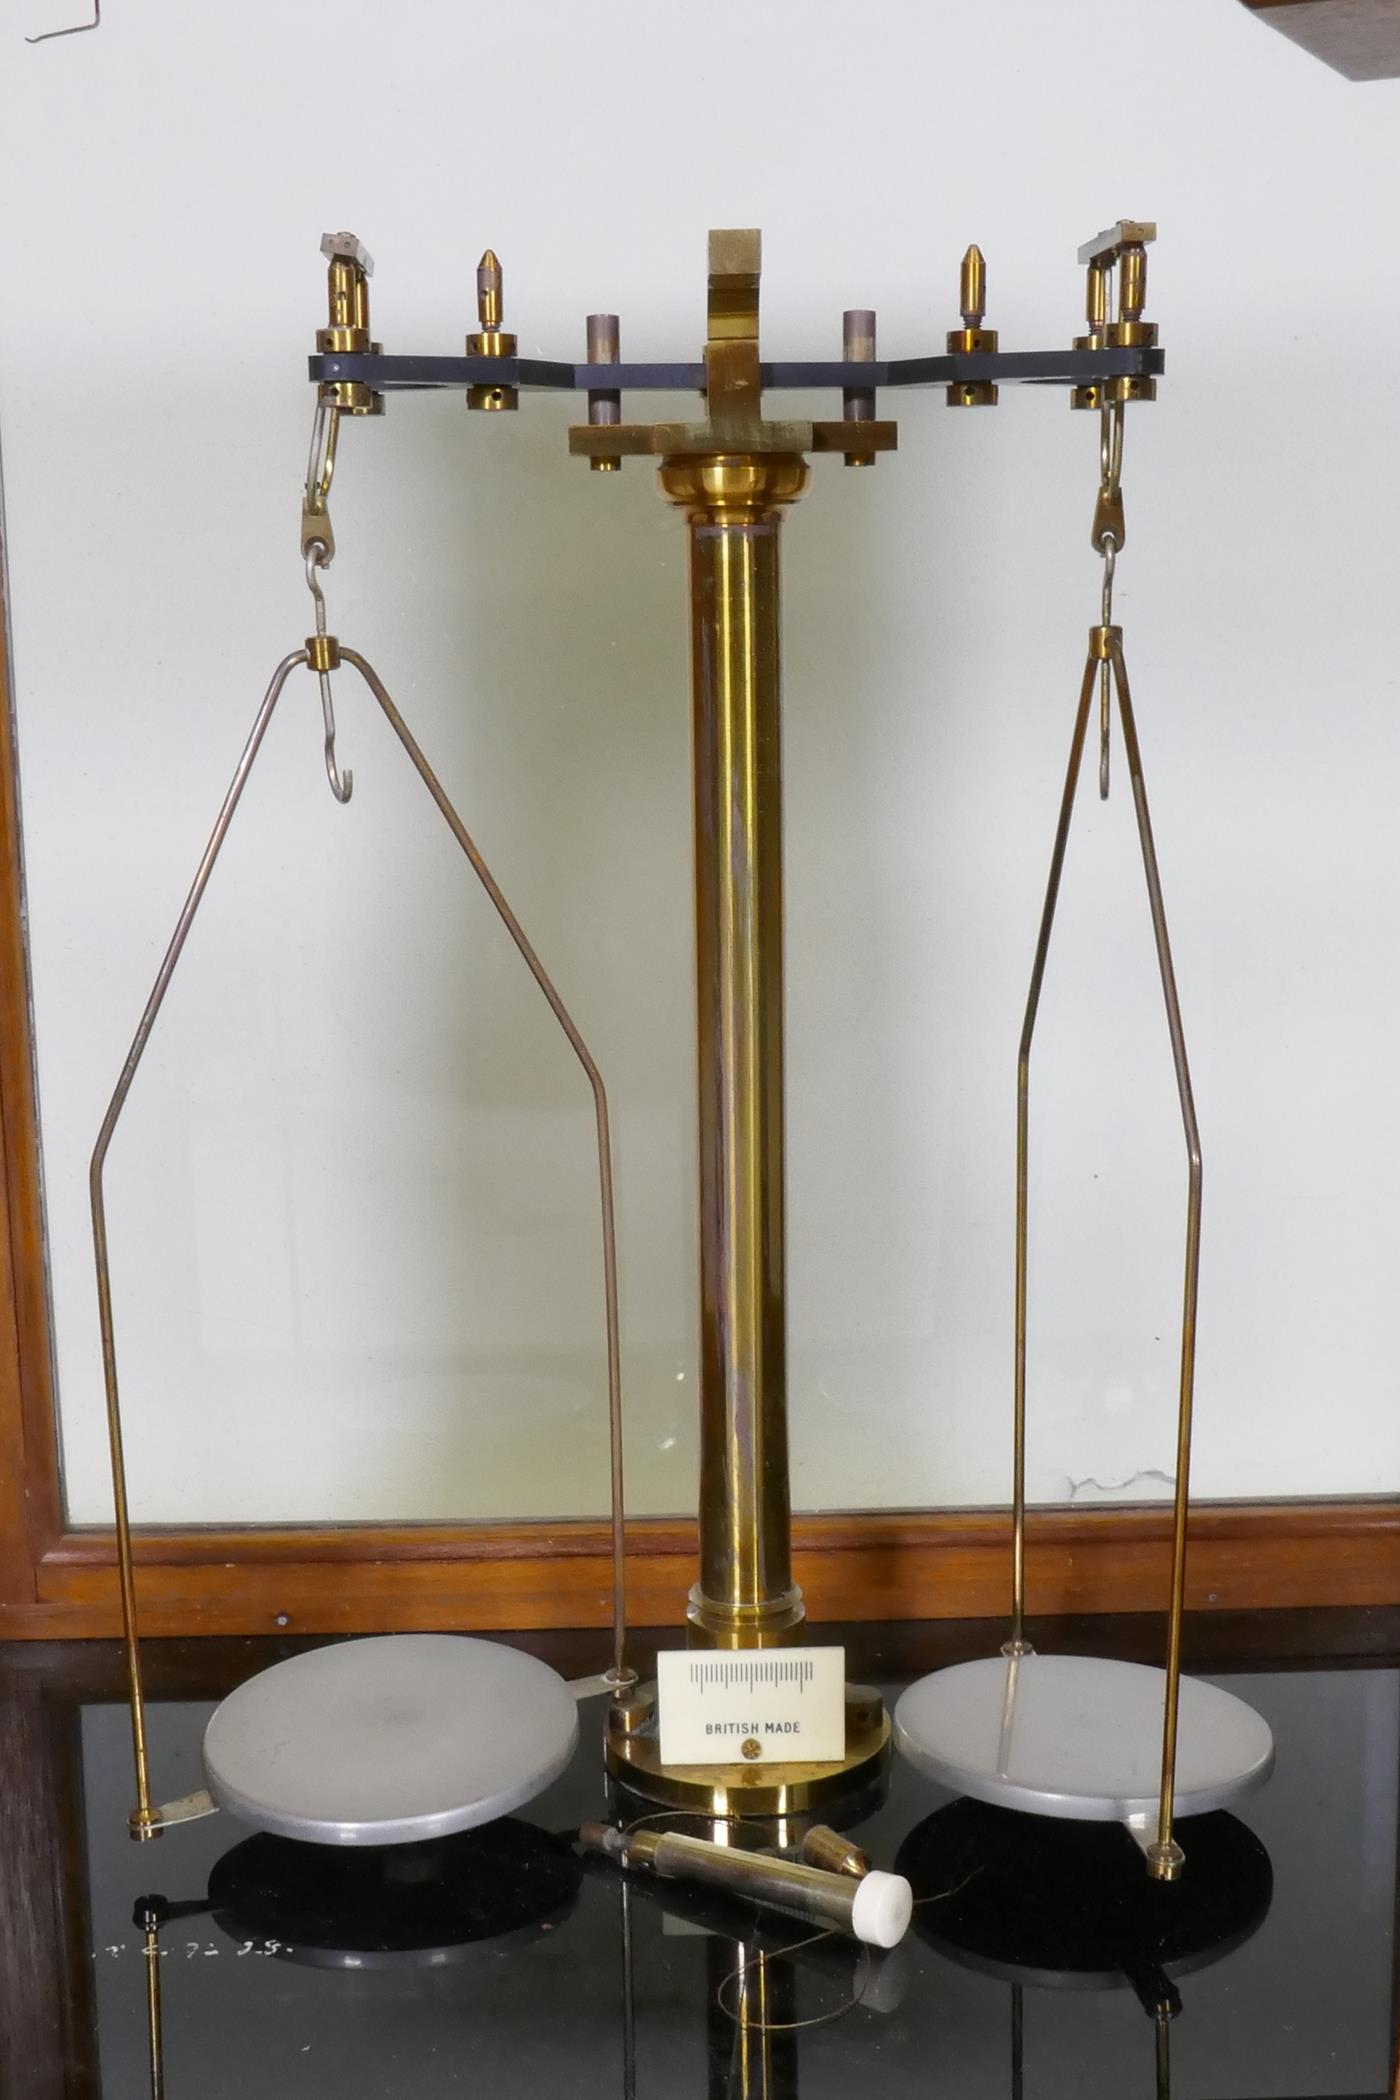 A set of balance scales in a glazed wood cabinet, 43 x 30 x 50cm - Image 3 of 3